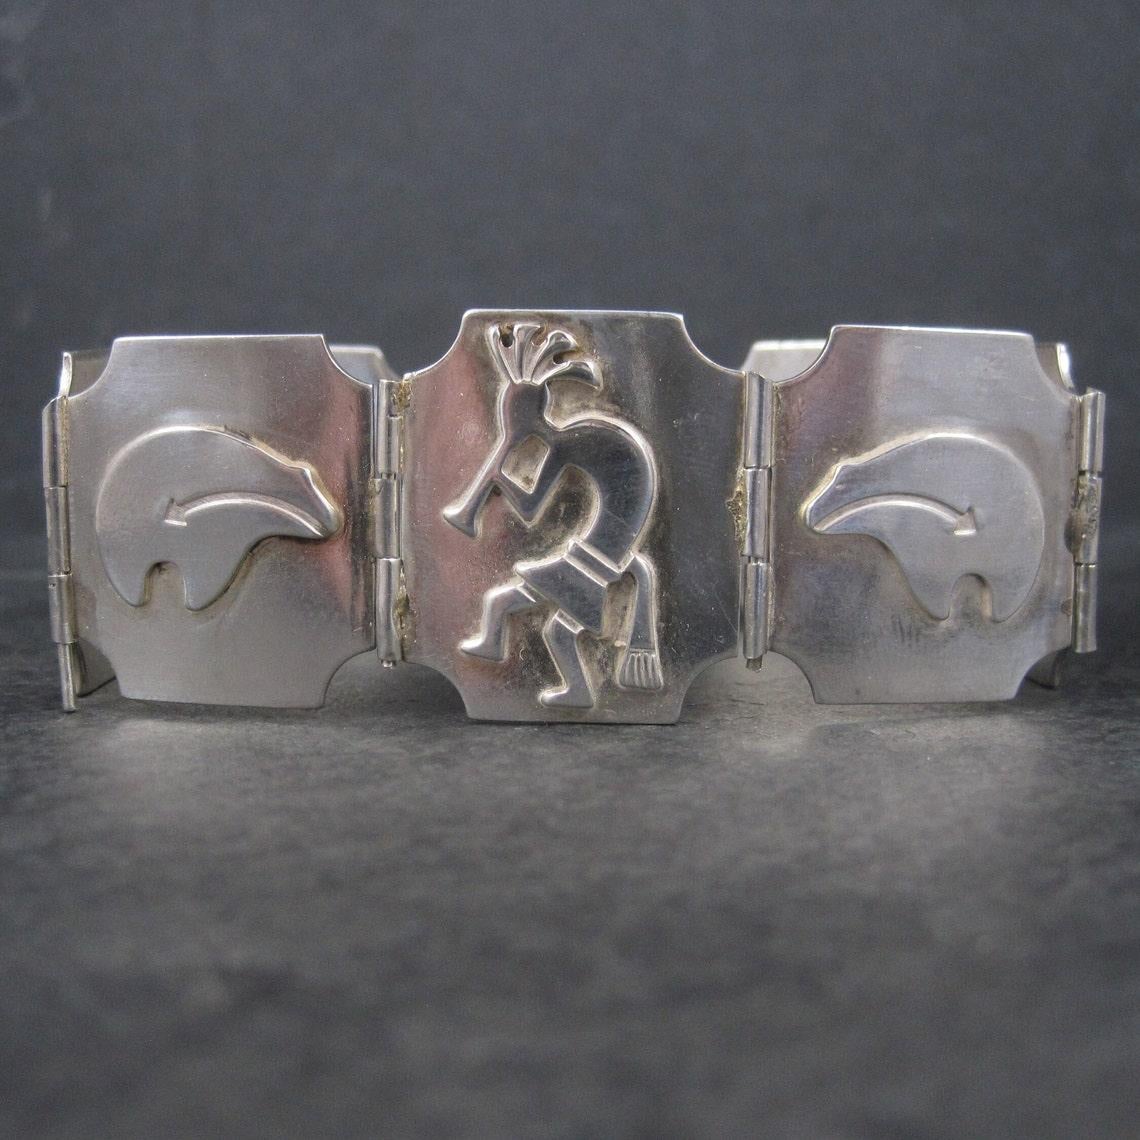 This beautiful Southwestern link bracelet is sterling silver.
It features kokopelli and spirit bears.

Measurements: 1 inch wide - 7 1/2 wearable inches
Weight: 48.9 grams

Marks: WS, Sterling

Condition: Excellent